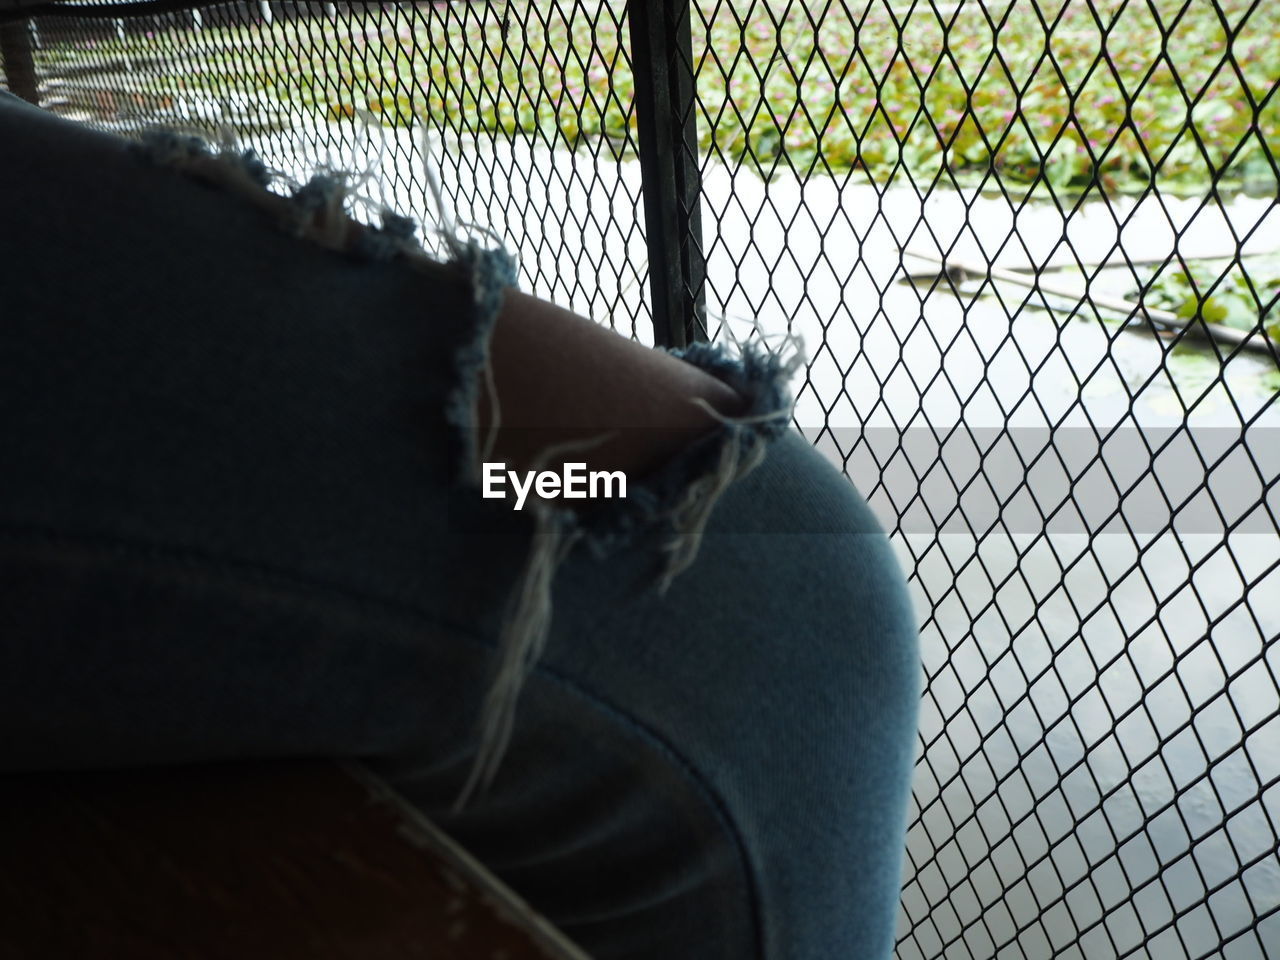 LOW SECTION OF PERSON BY CHAINLINK FENCE AGAINST ROAD